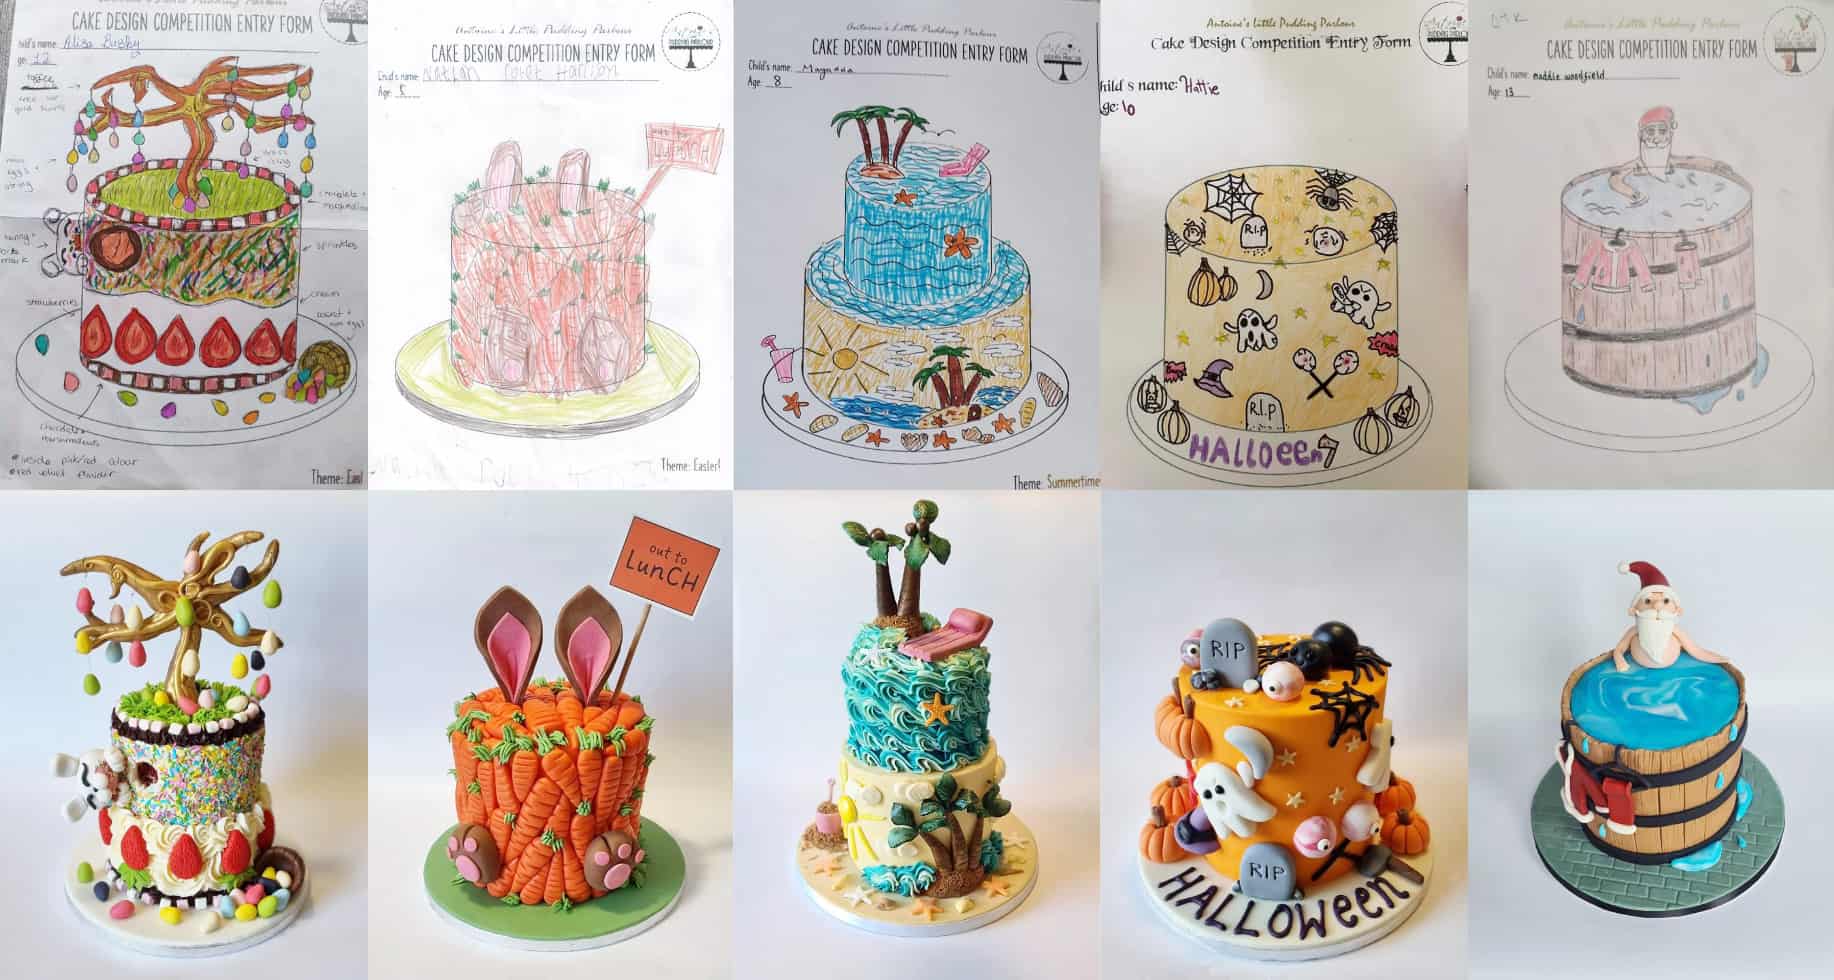 Previous cake designs and creations